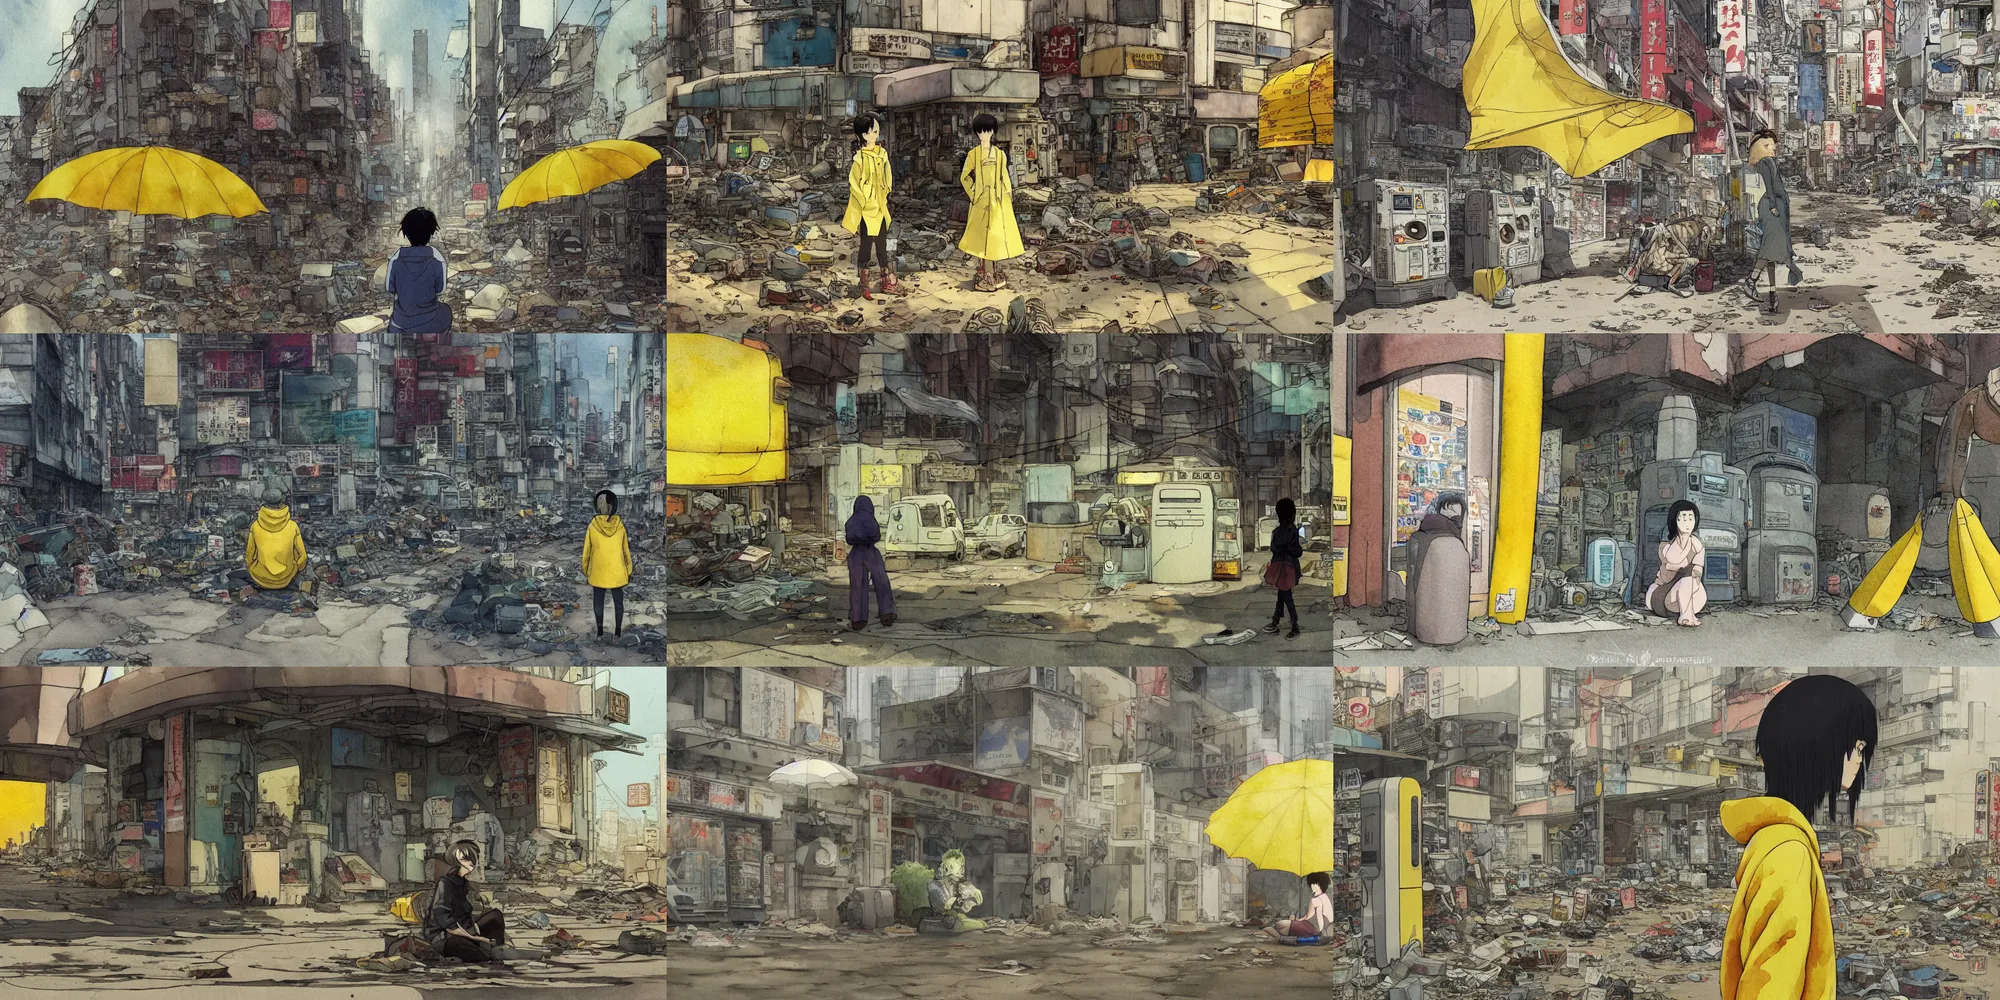 Prompt: incredible curvilinear screenshot, simple watercolor, paper texture, katsuhiro otomo ghost in the shell movie scene, distant shot of hoody girl side view sitting under a yellow parasol in deserted dusty shinjuku junk town, broken vending machines, old pawn shop, bright sun bleached ground, mud, fog, dust, windy, scary chameleon face muscle robot monster lurks in the background, big robot hand, robot ghost mask, teeth, animatronic, black smoke, pale beige sky, junk tv, texture, strange, impossible, fur, spines, mouth, pipe brain, shell, brown mud, dust, bored expression, overhead wires, telephone pole, dusty, dry, pencil marks, genius party,shinjuku, koju morimoto, katsuya terada, masamune shirow, tatsuyuki tanaka , hd, 4k, remaster, dynamic camera angle, deep 3 point perspective, fish eye, dynamic scene